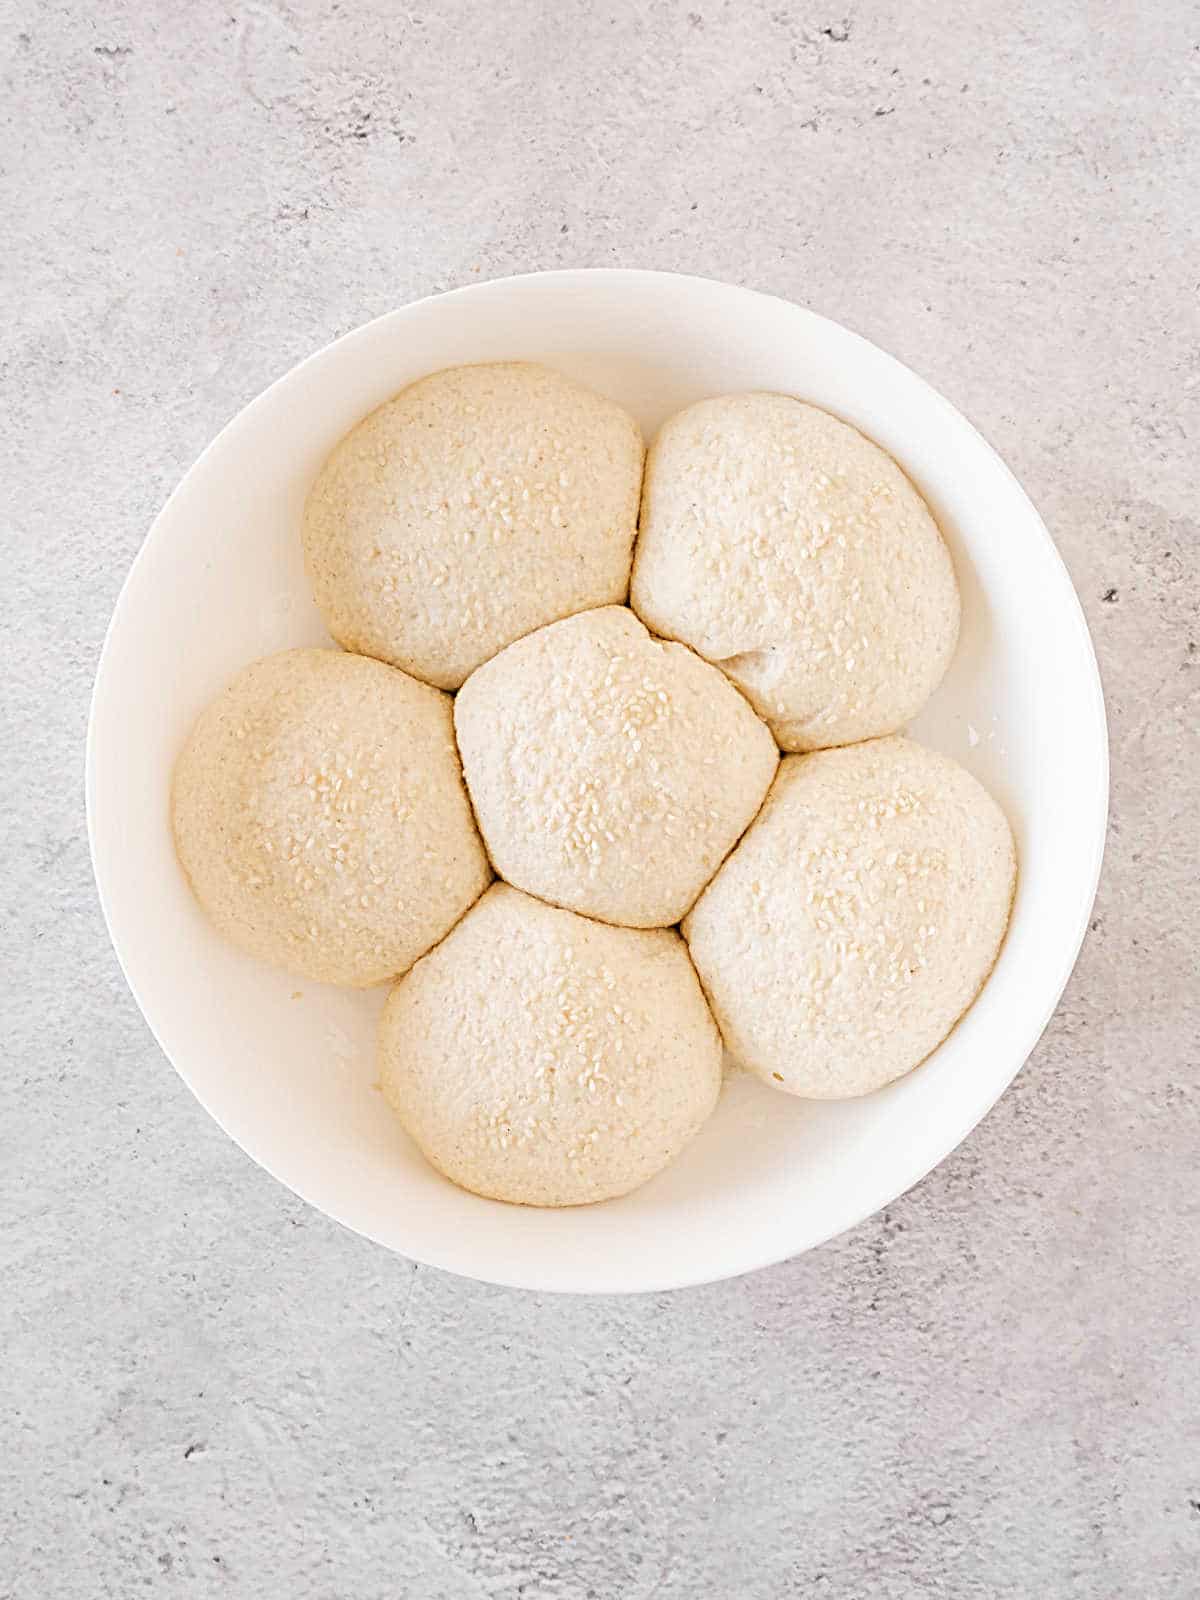 Doubled bread dough balls in a white round dish. Gray surface.